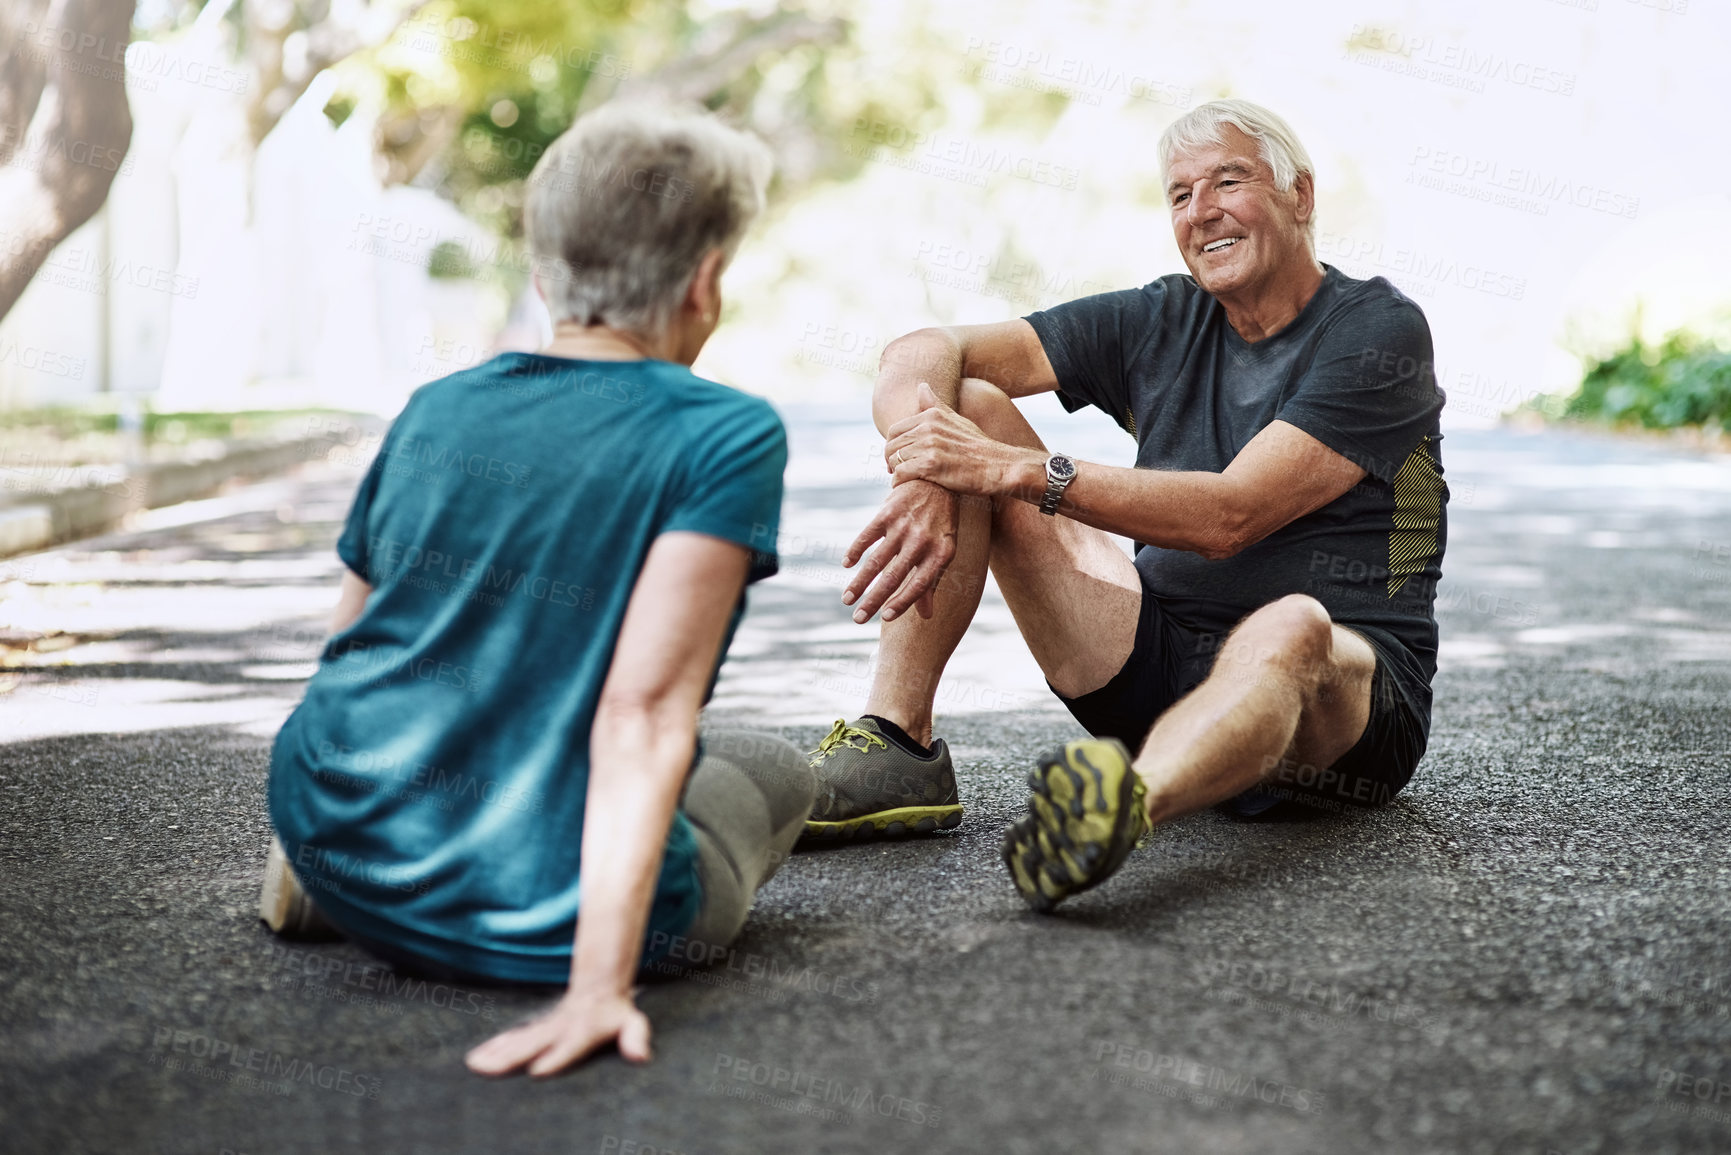 Buy stock photo Shot of a senior couple taking a break while out for a run together